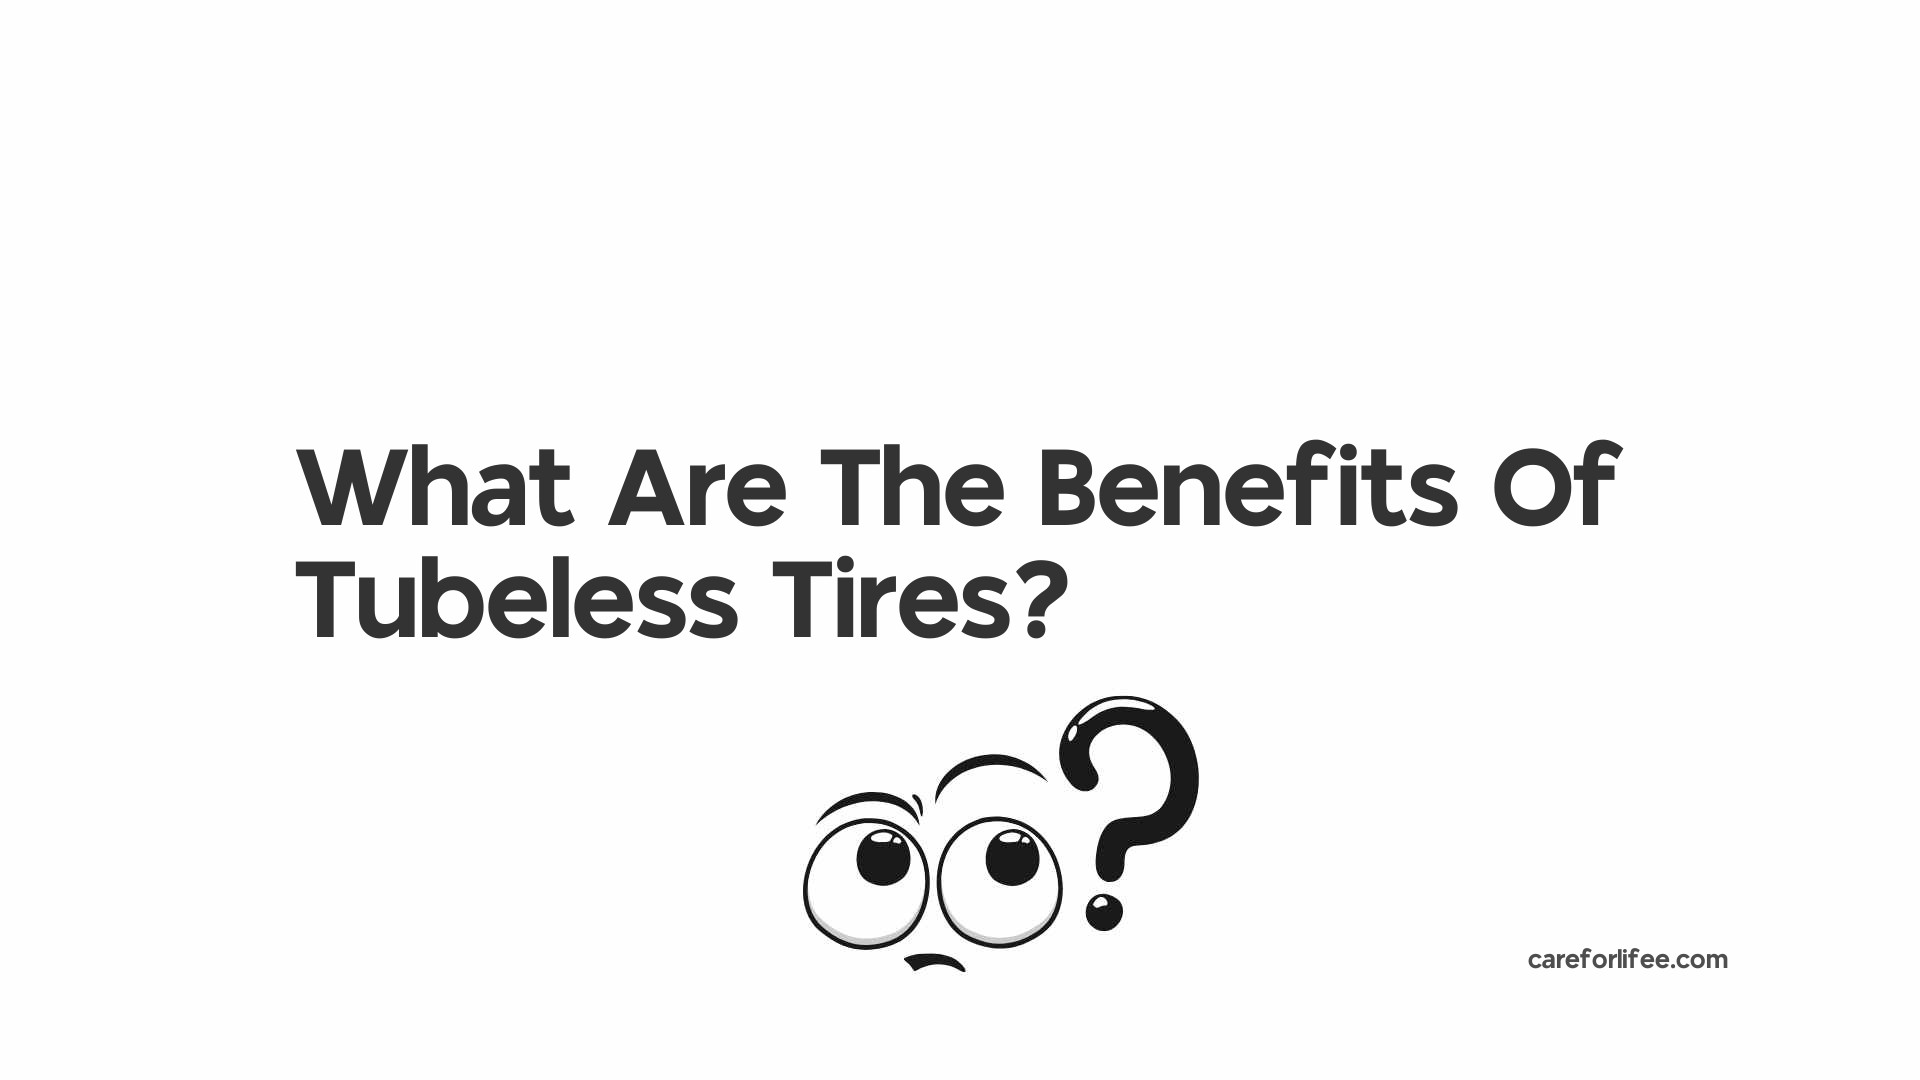 What Are The Benefits Of Tubeless Tires?